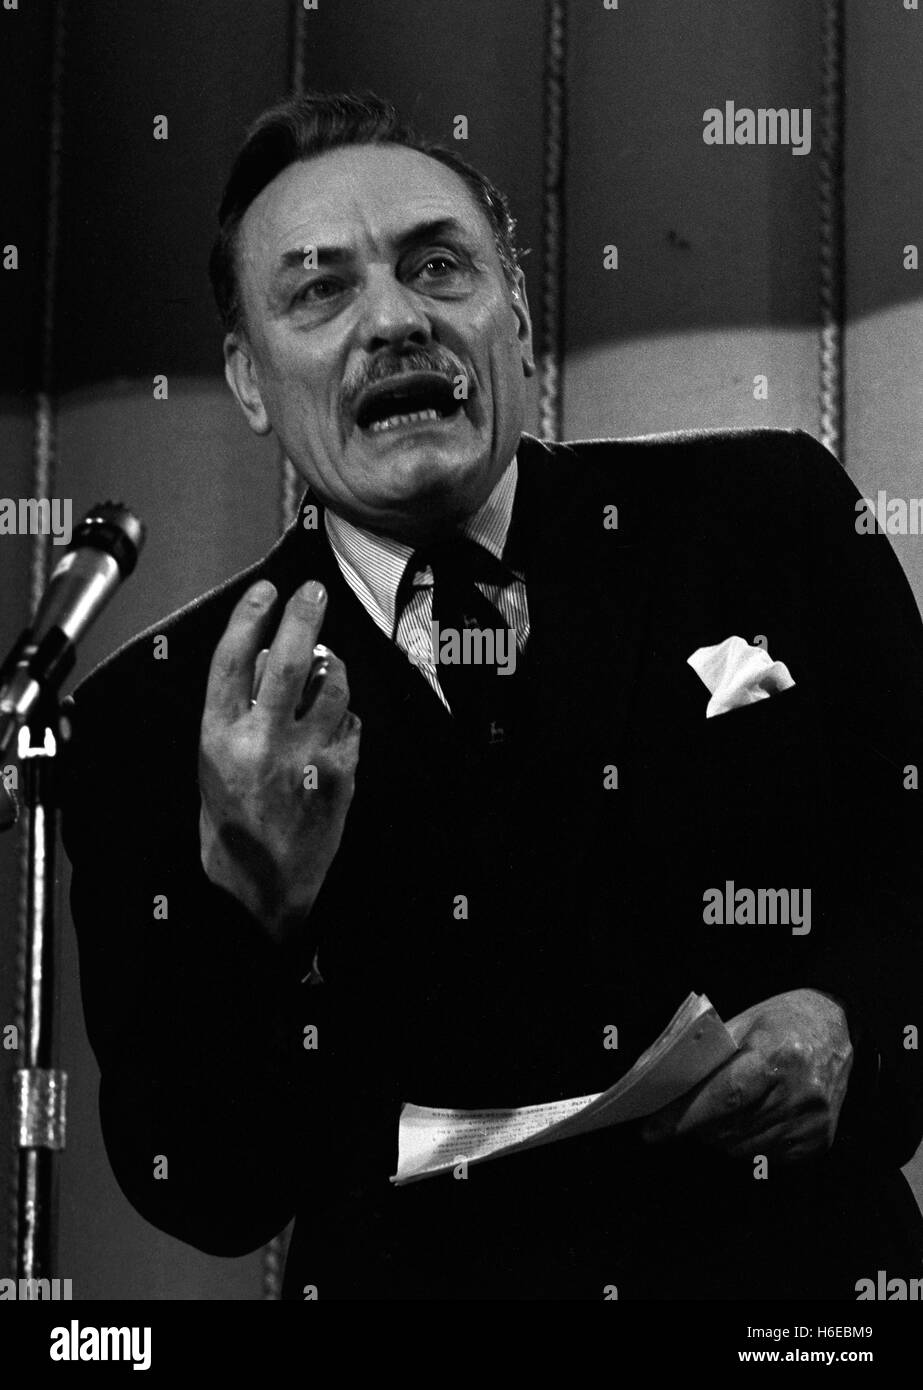 A strong gesture from Tory rebel Enoch Powell during a public meeting at the Mayfair Suite, Bullring Centre. Mr Powell was speaking in support of 'Get Britain Out' campaign, an anti-Common Market movement.PA AF 165380-114 Stock Photo